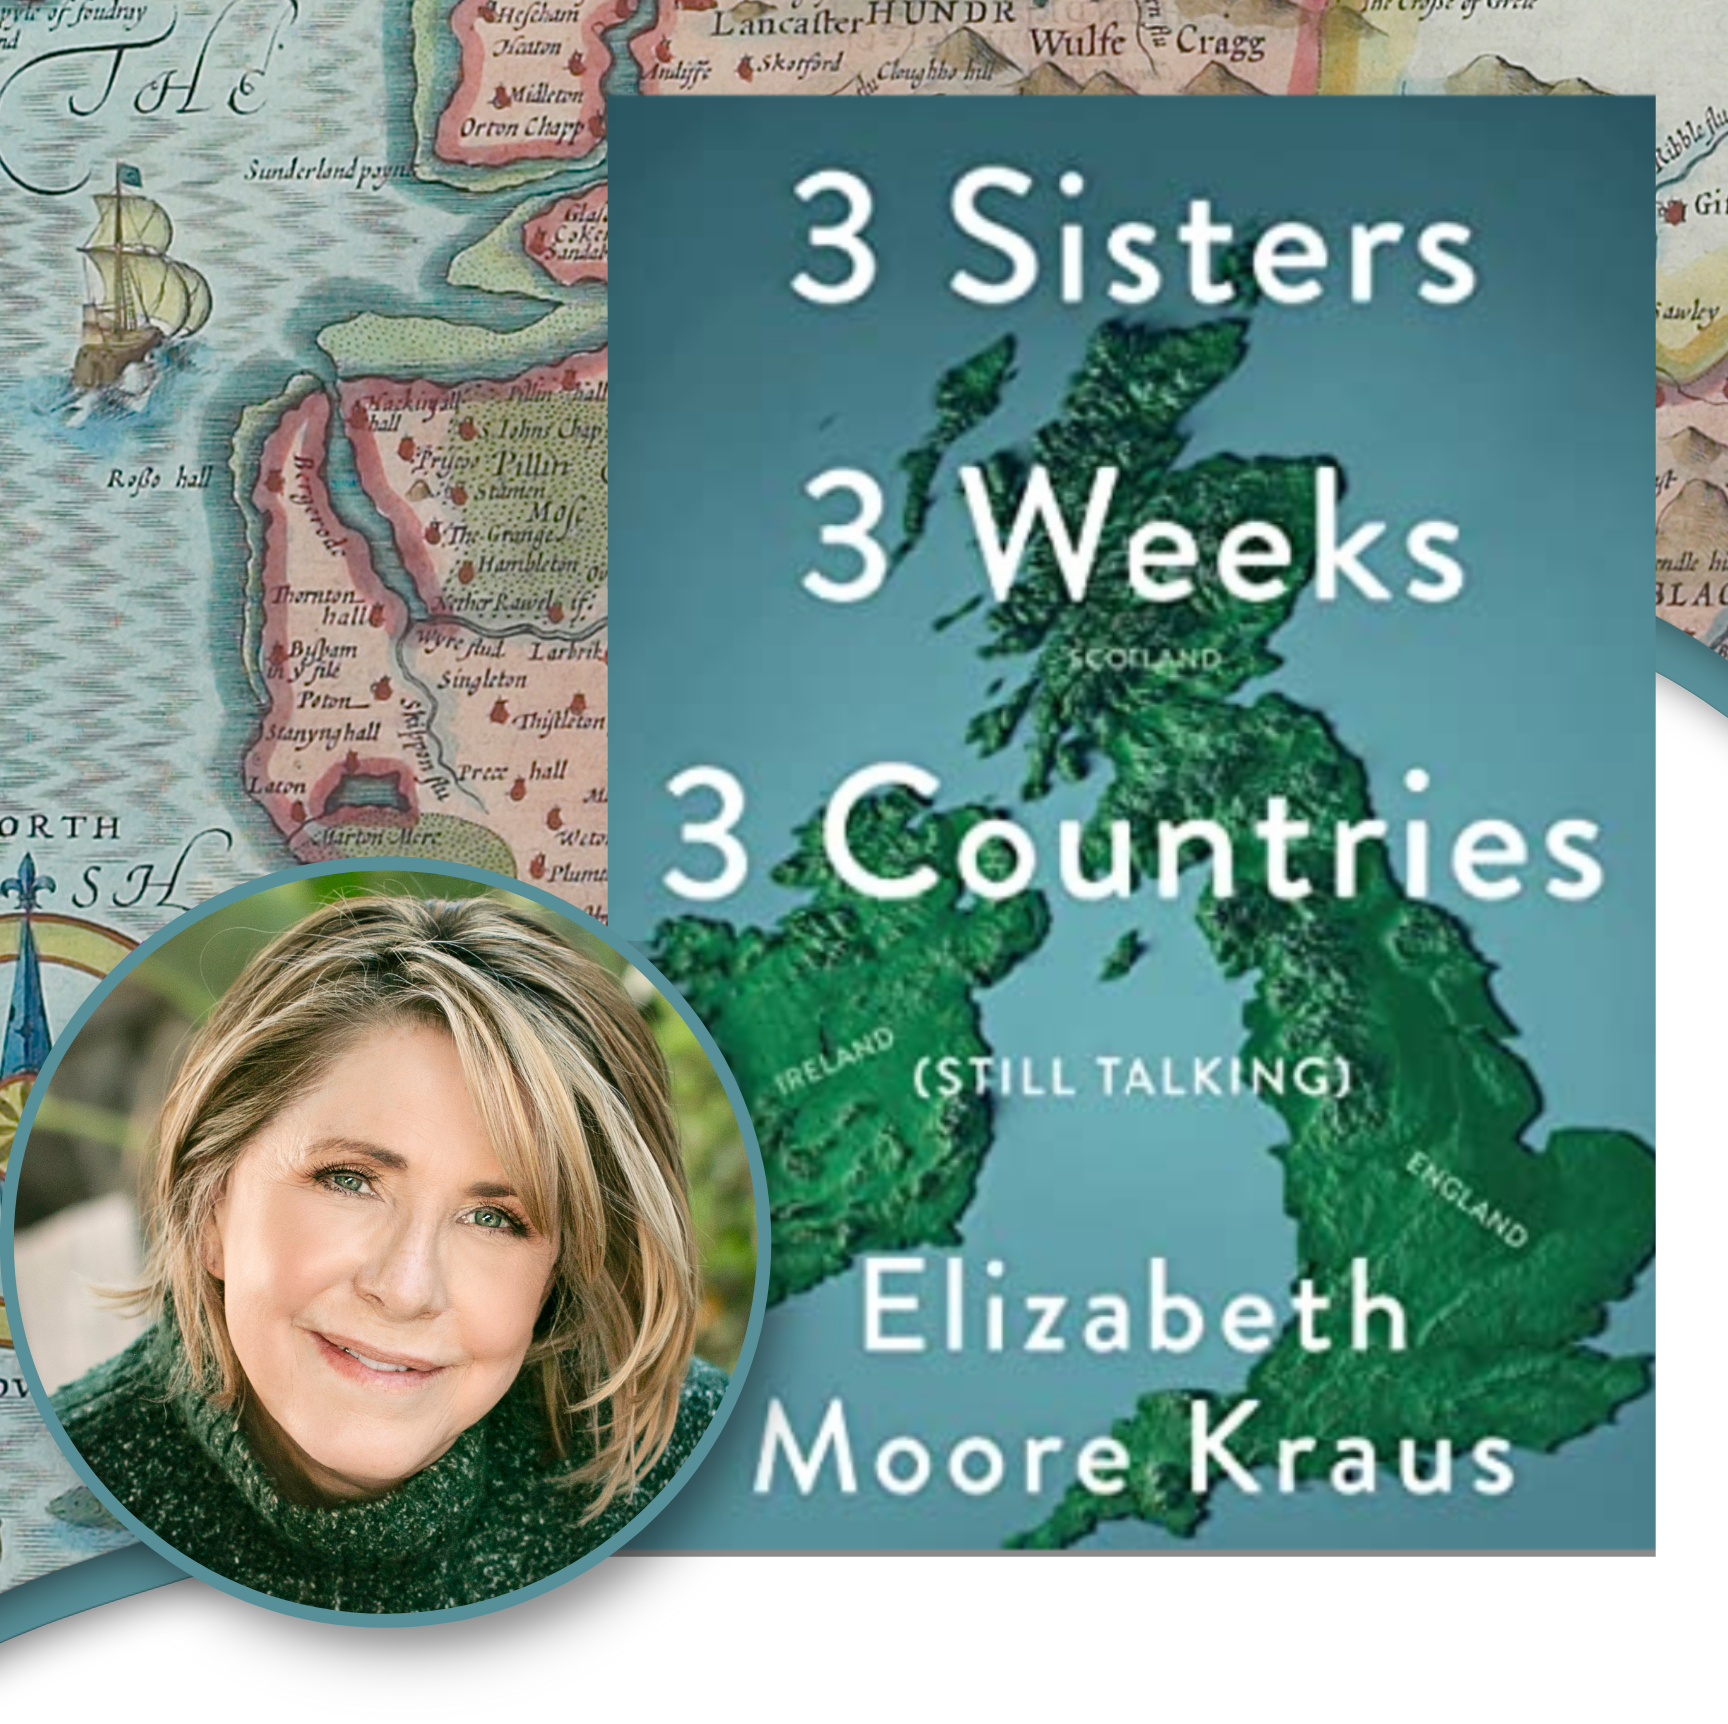 Book cover 3 sisters 3 weeks 3 countries (still talking) by Elizabeth Moore Kraus picture of author with map background